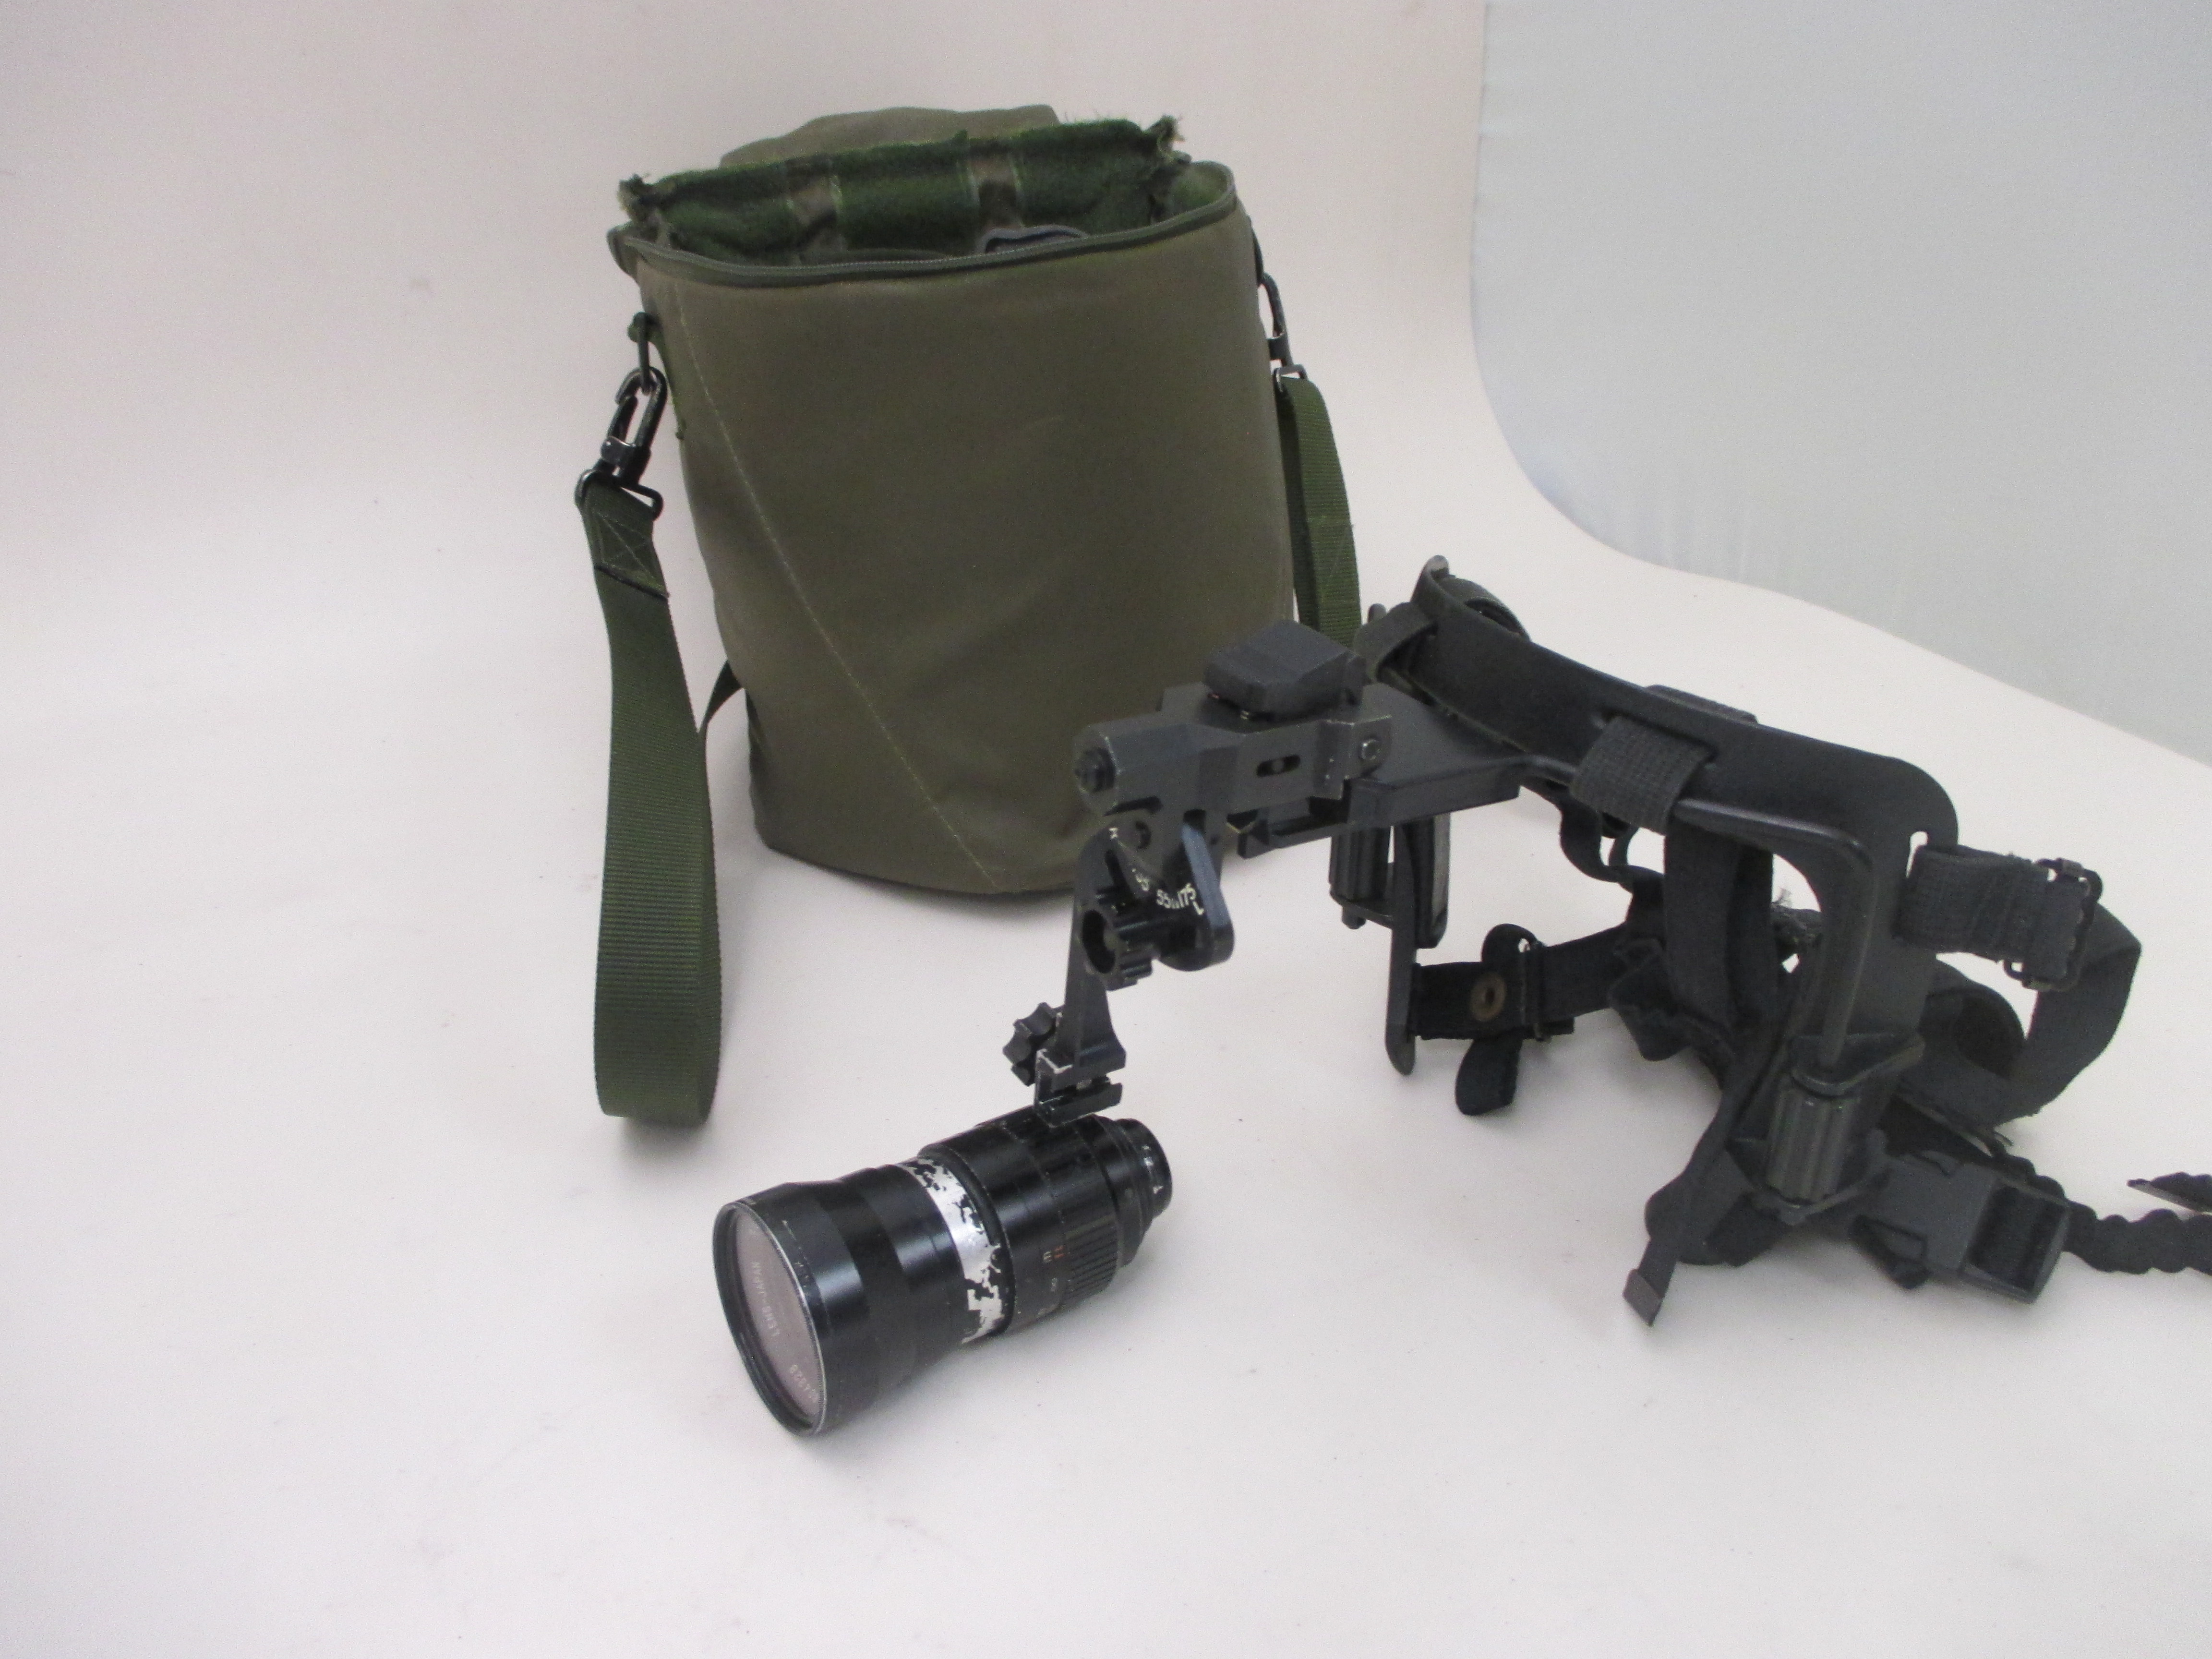 Head Mounted Frame in Carrying case.